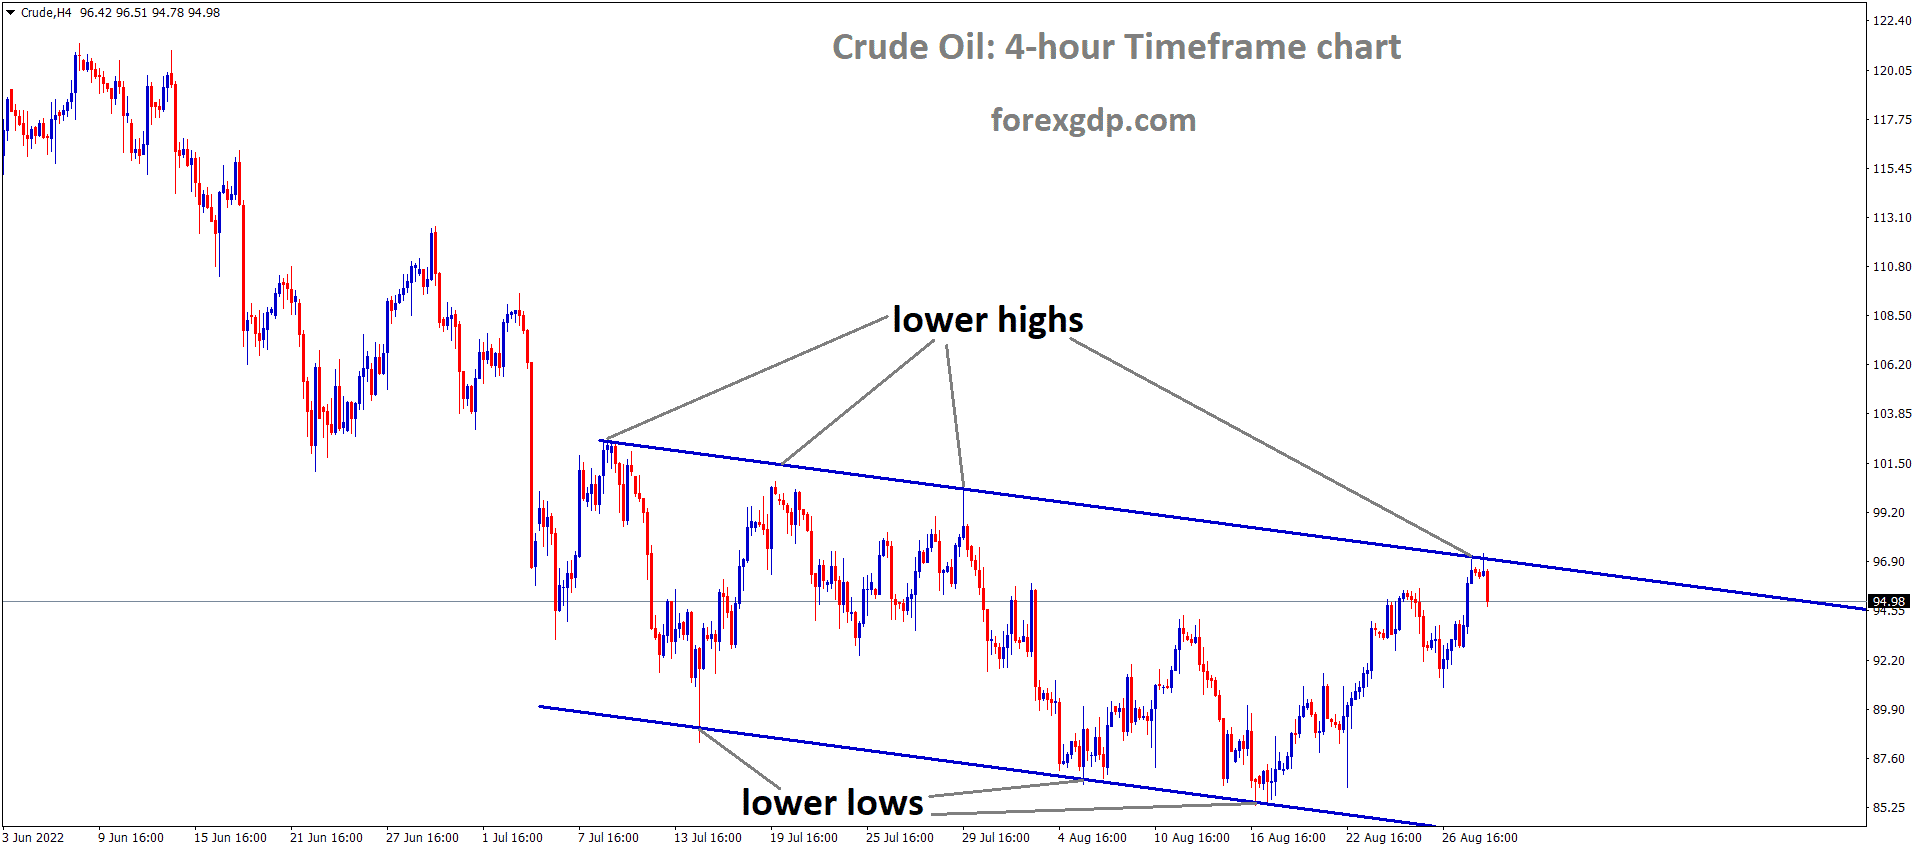 Crude Oil is moving in the Descending channel and the market has fallen from the lower high area of the channel